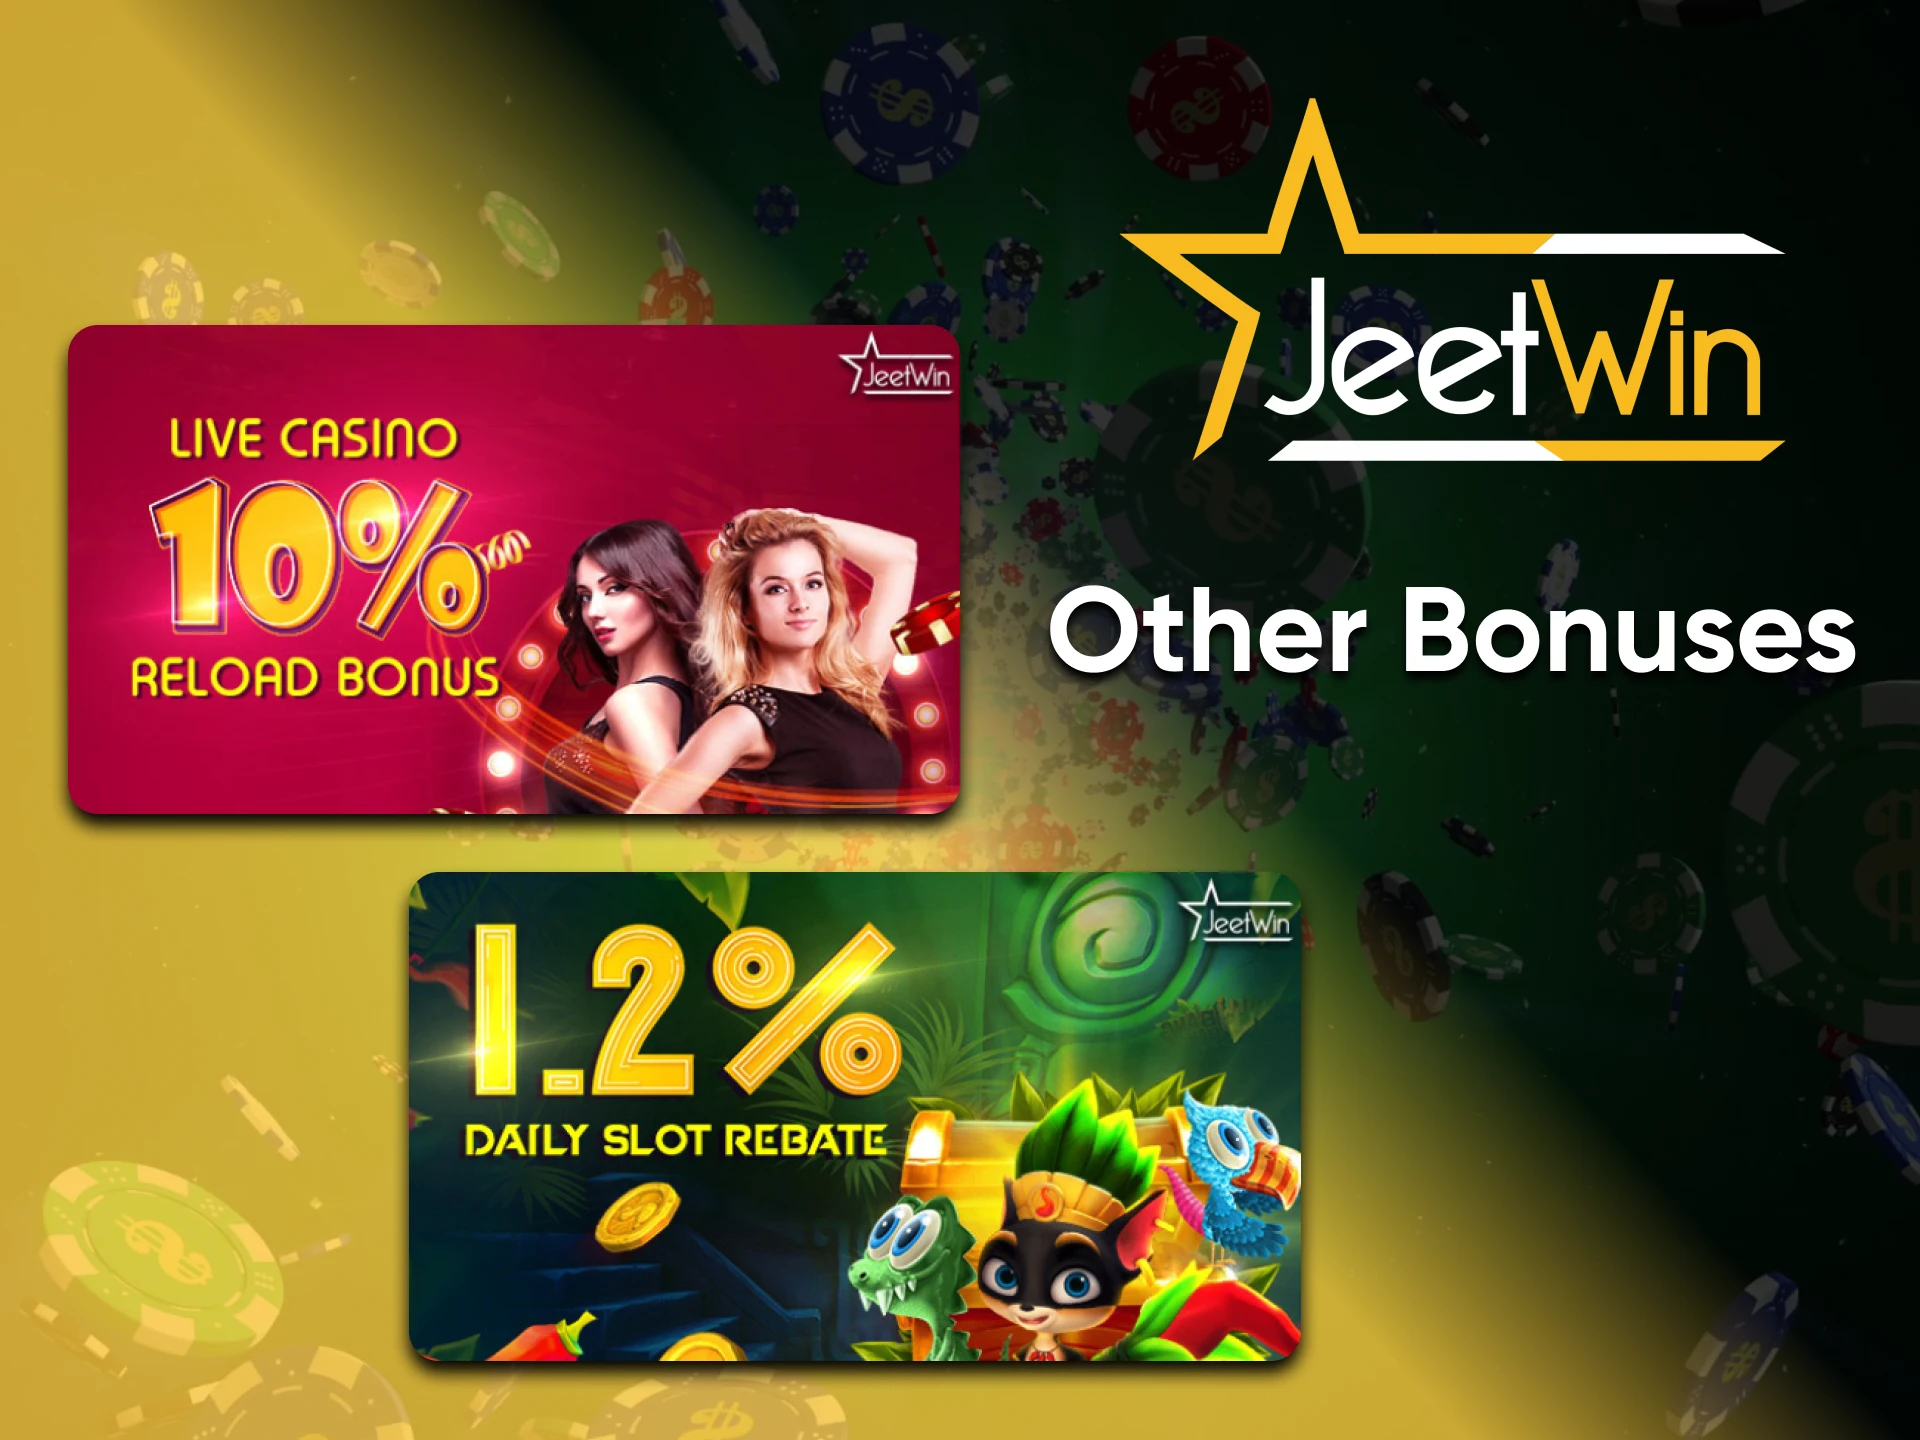 When you play at Jeetwin Casino you get a lot of bonuses.